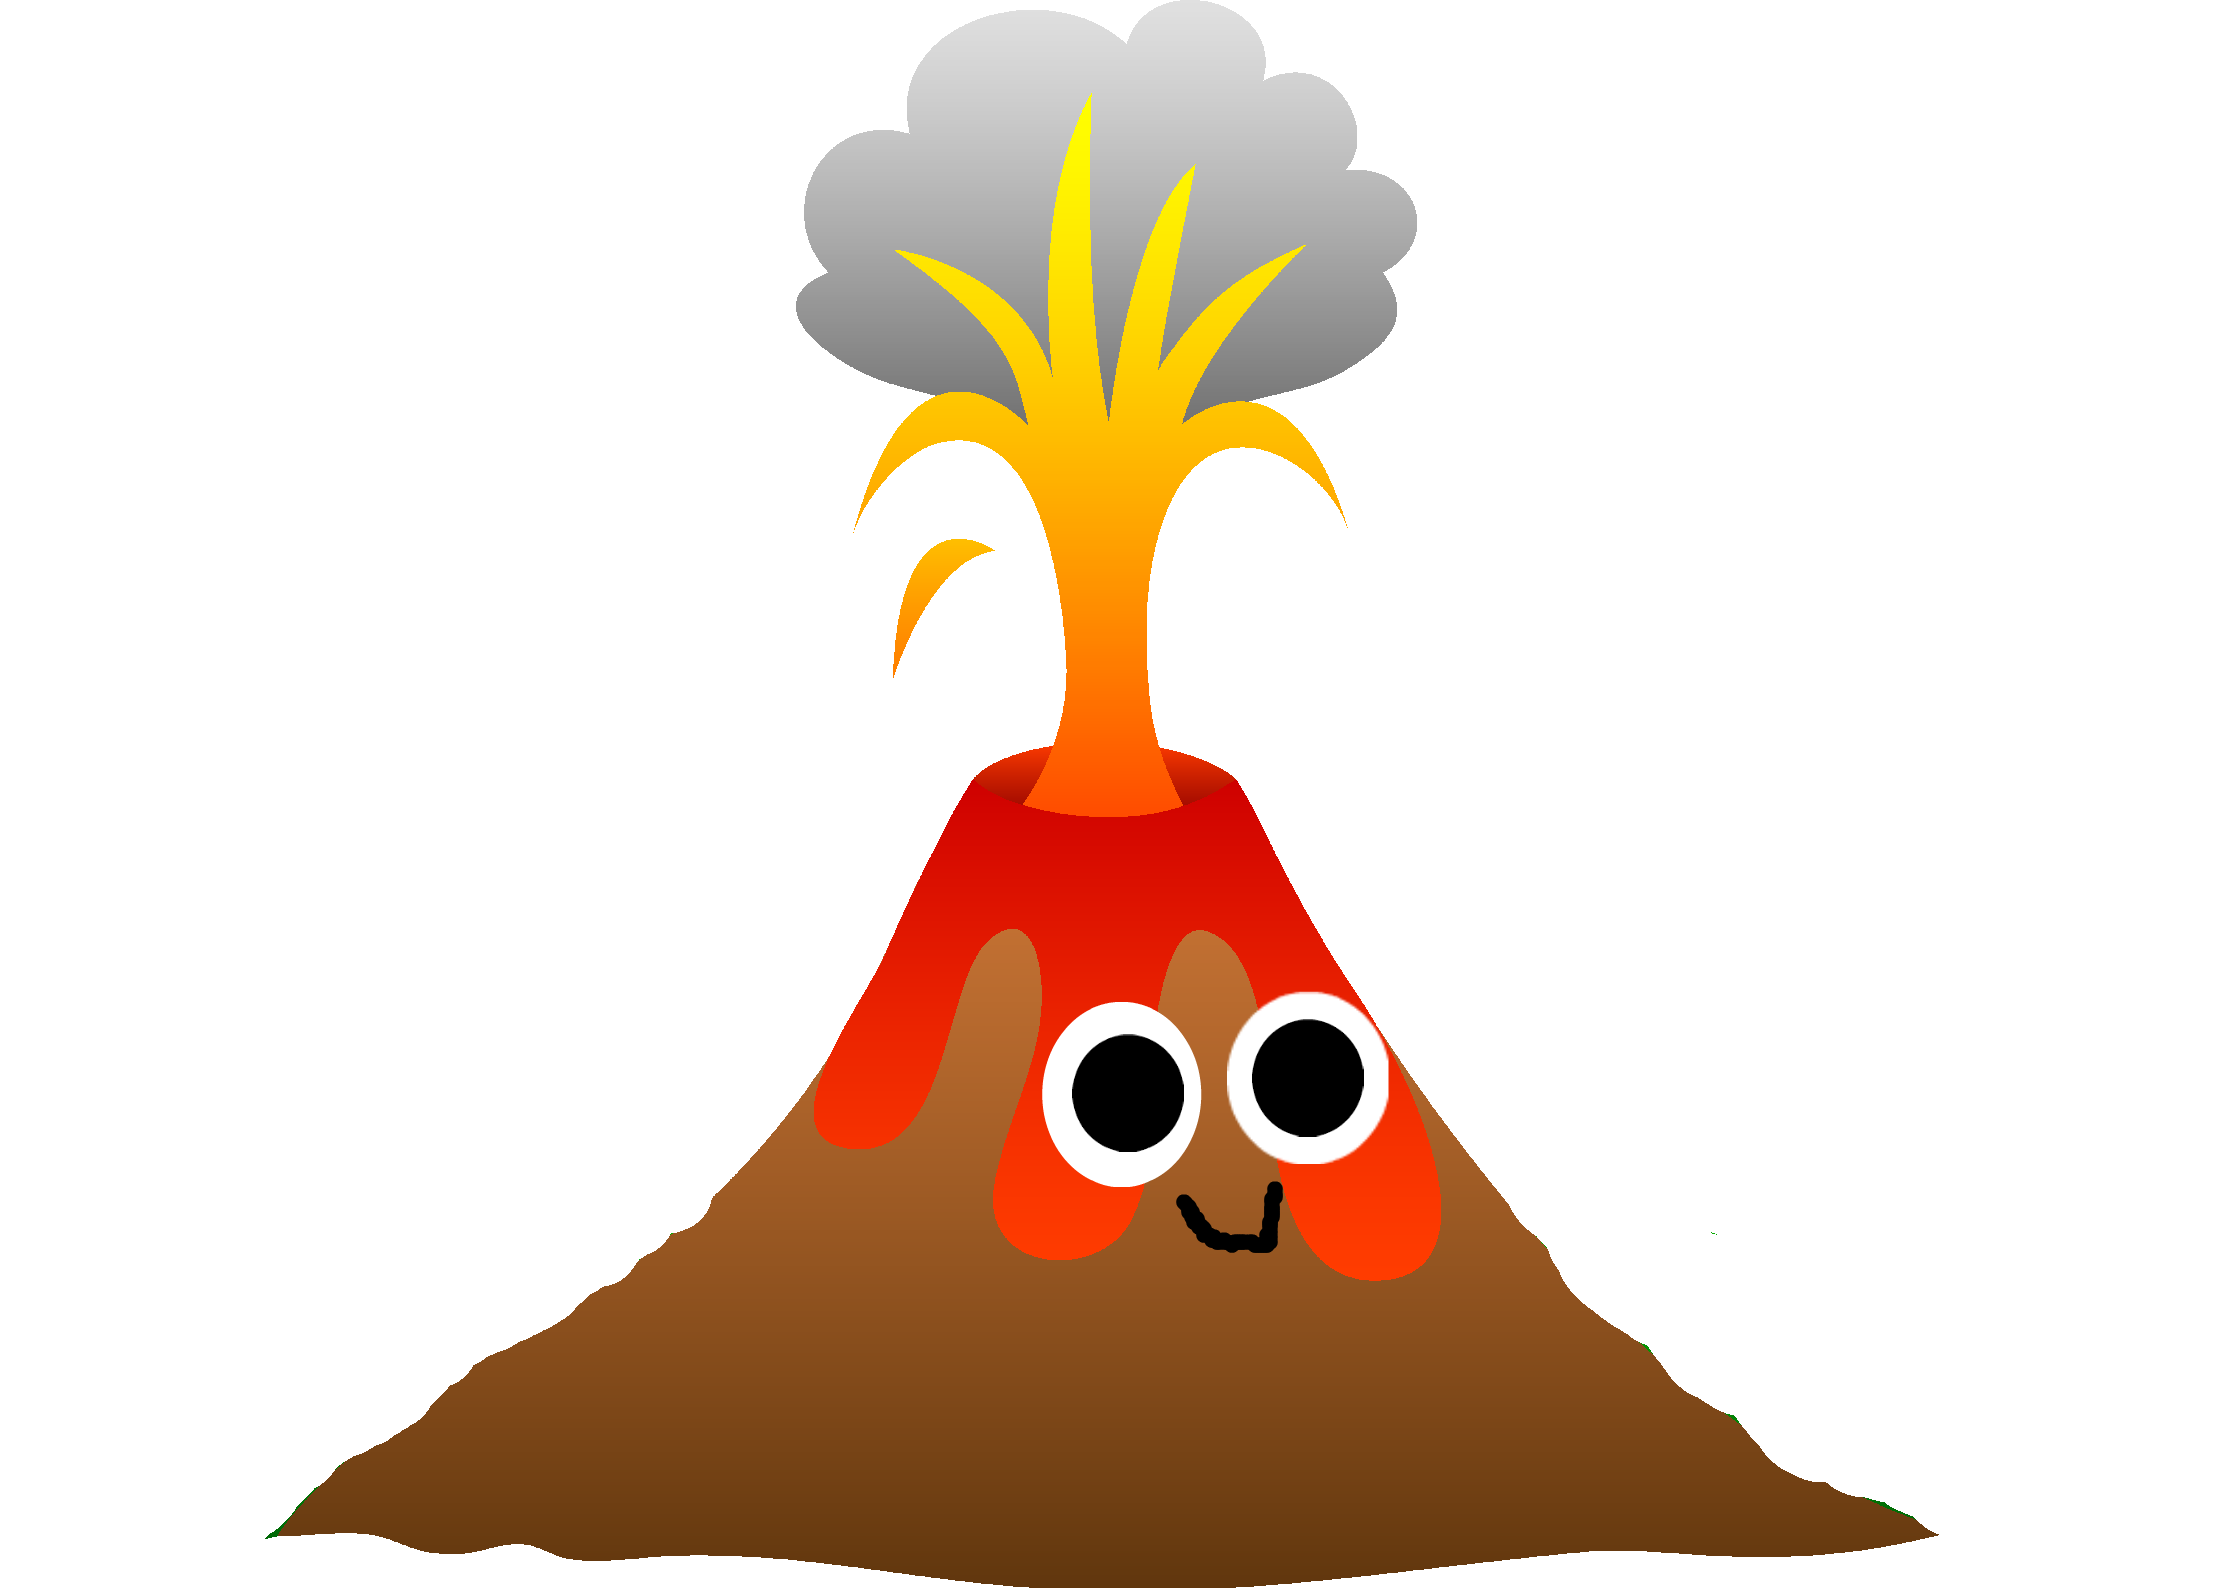 Geology clipart volcano. Eruption drawing at getdrawings